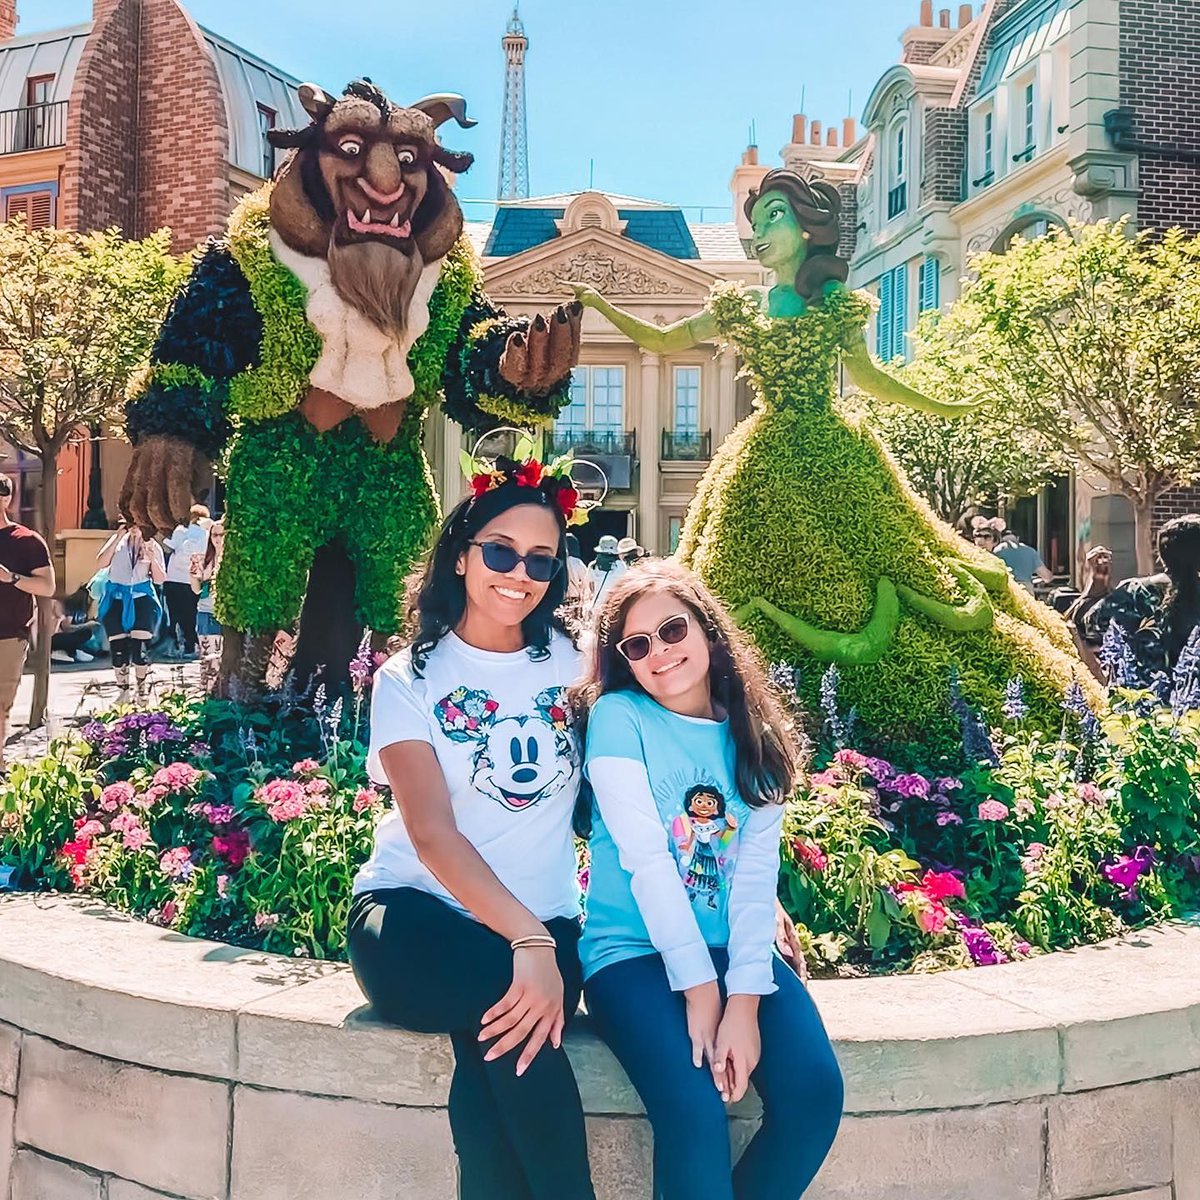 It's officially spring and the flowers are in full bloom at #DisneyWorld! What's your favorite topiary at Epcot's Flower and Garden Festival? If you're ready to visit, learn about planning a magical vacation to Orlando on our website! 📸 IG @ mrs.everydaymommy XOXO #nextvacation